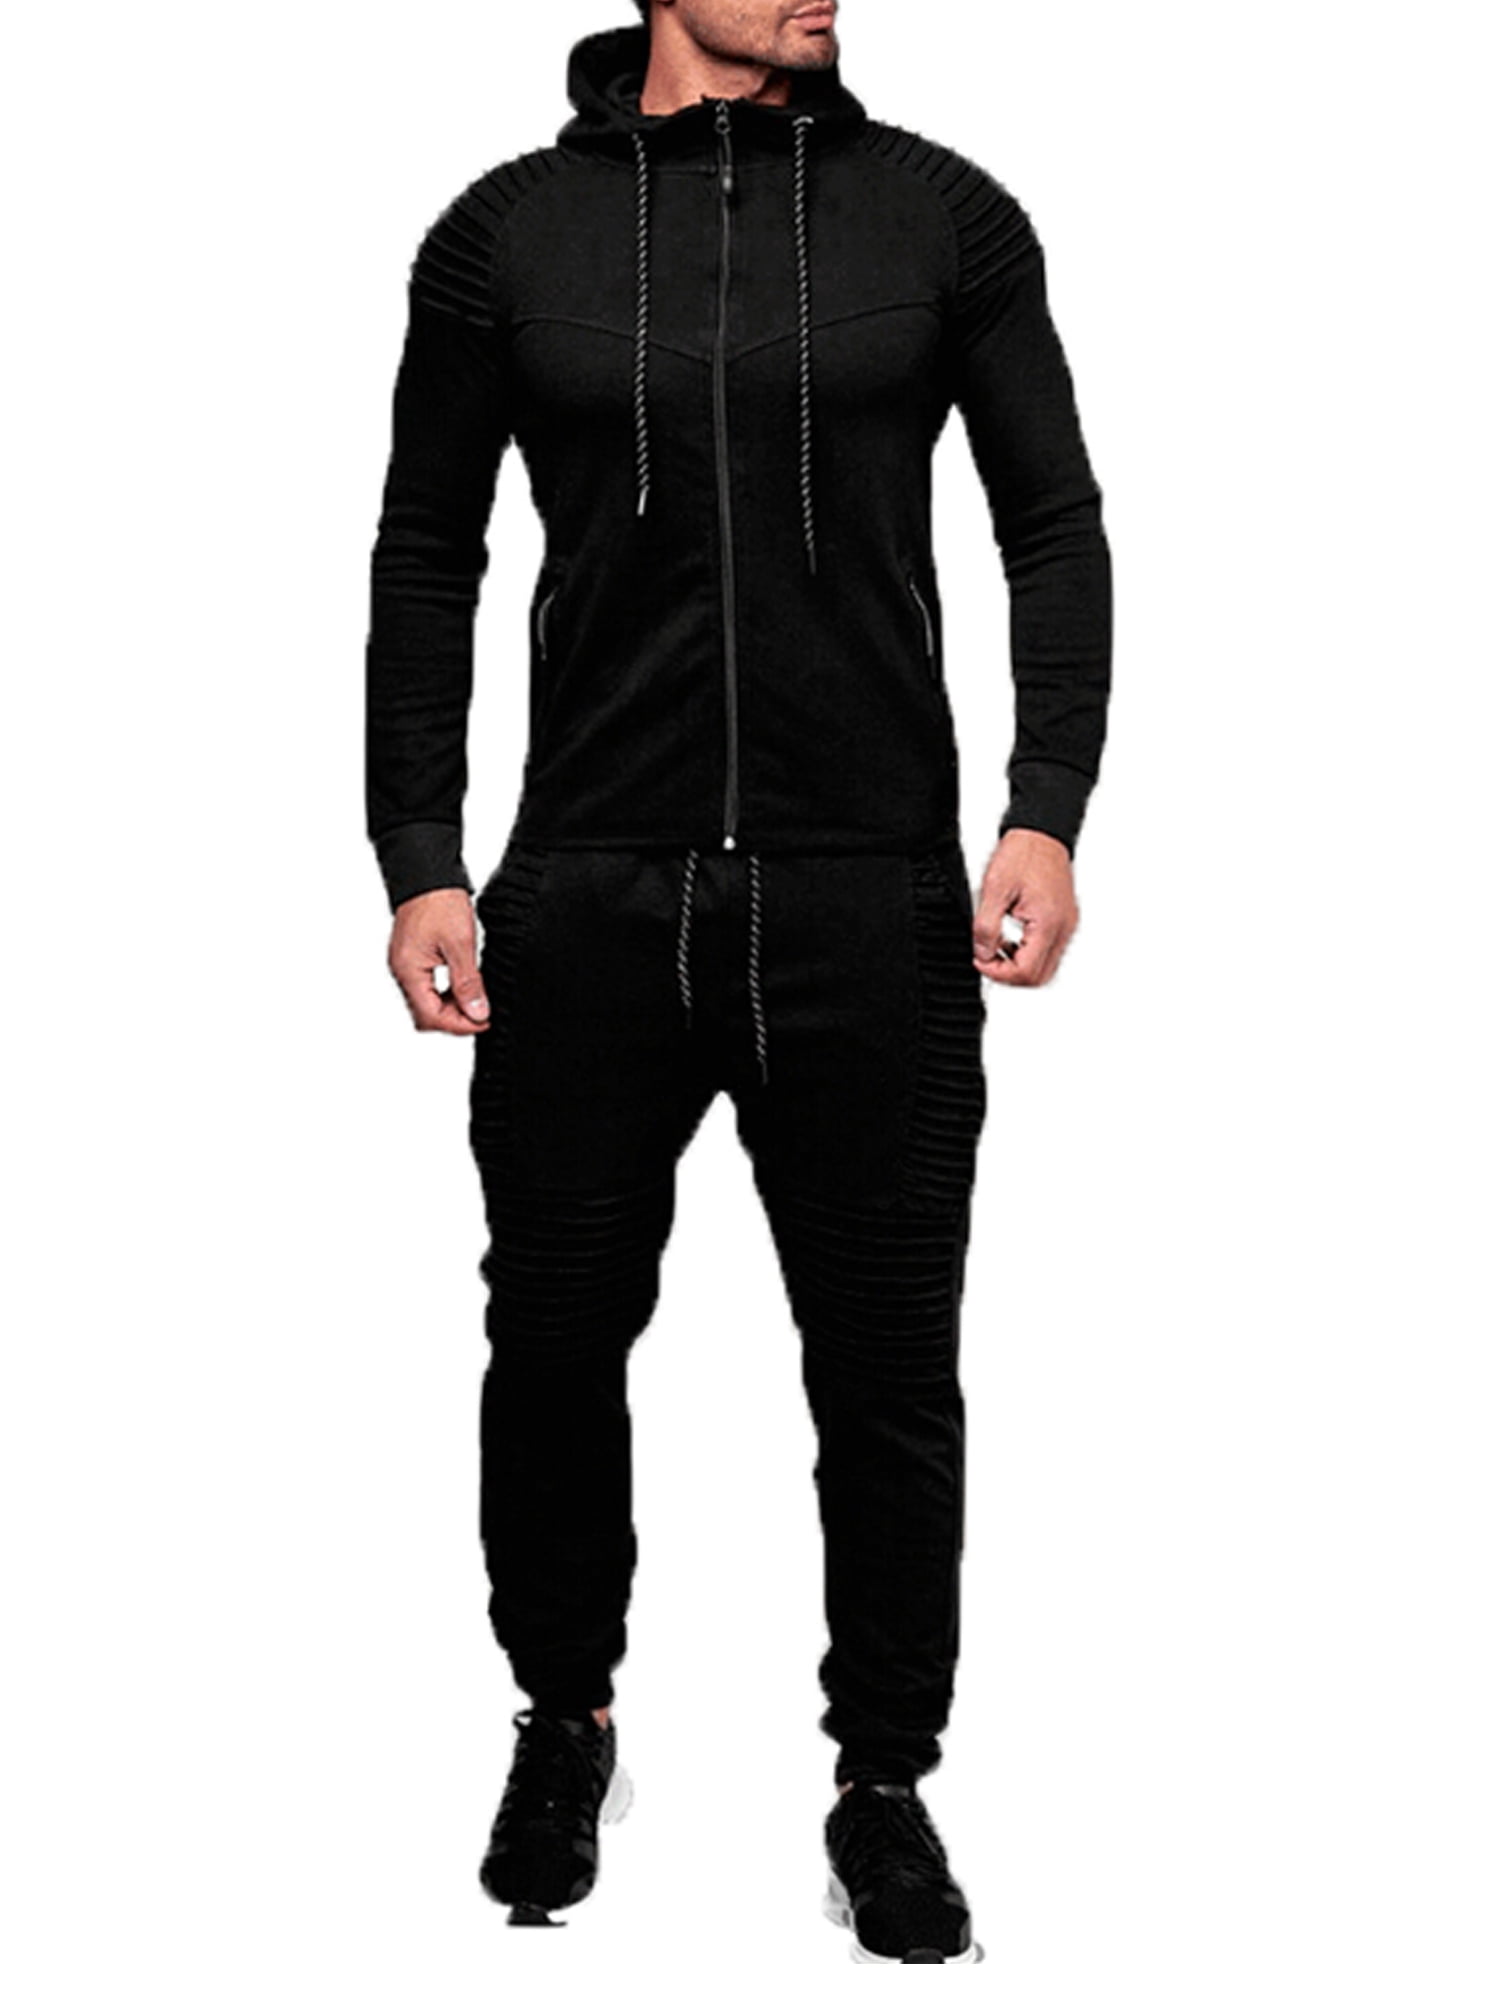 Eyicmarn Mens Sweatsuits 2 Piece Hoodie Tracksuit Sets Casual Solid ...